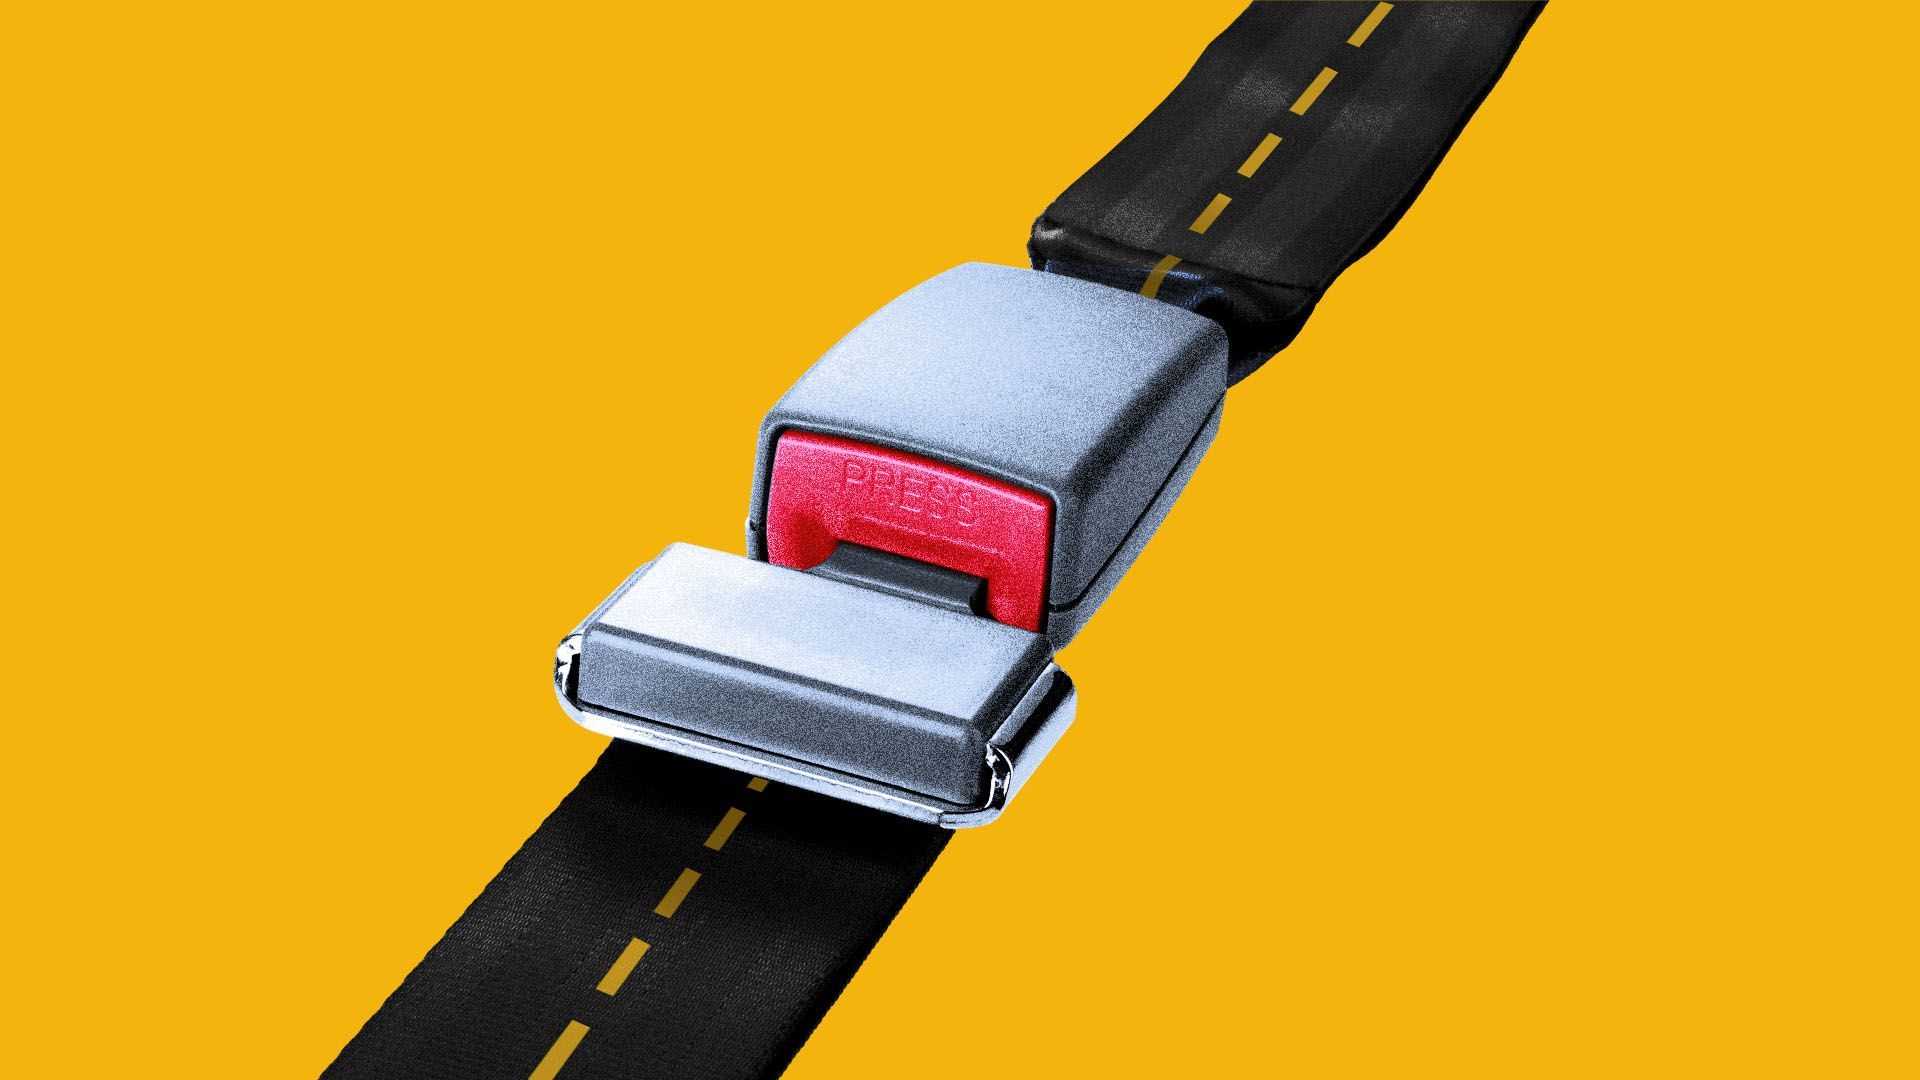 Illustration of a seat belt with a yellow road marking